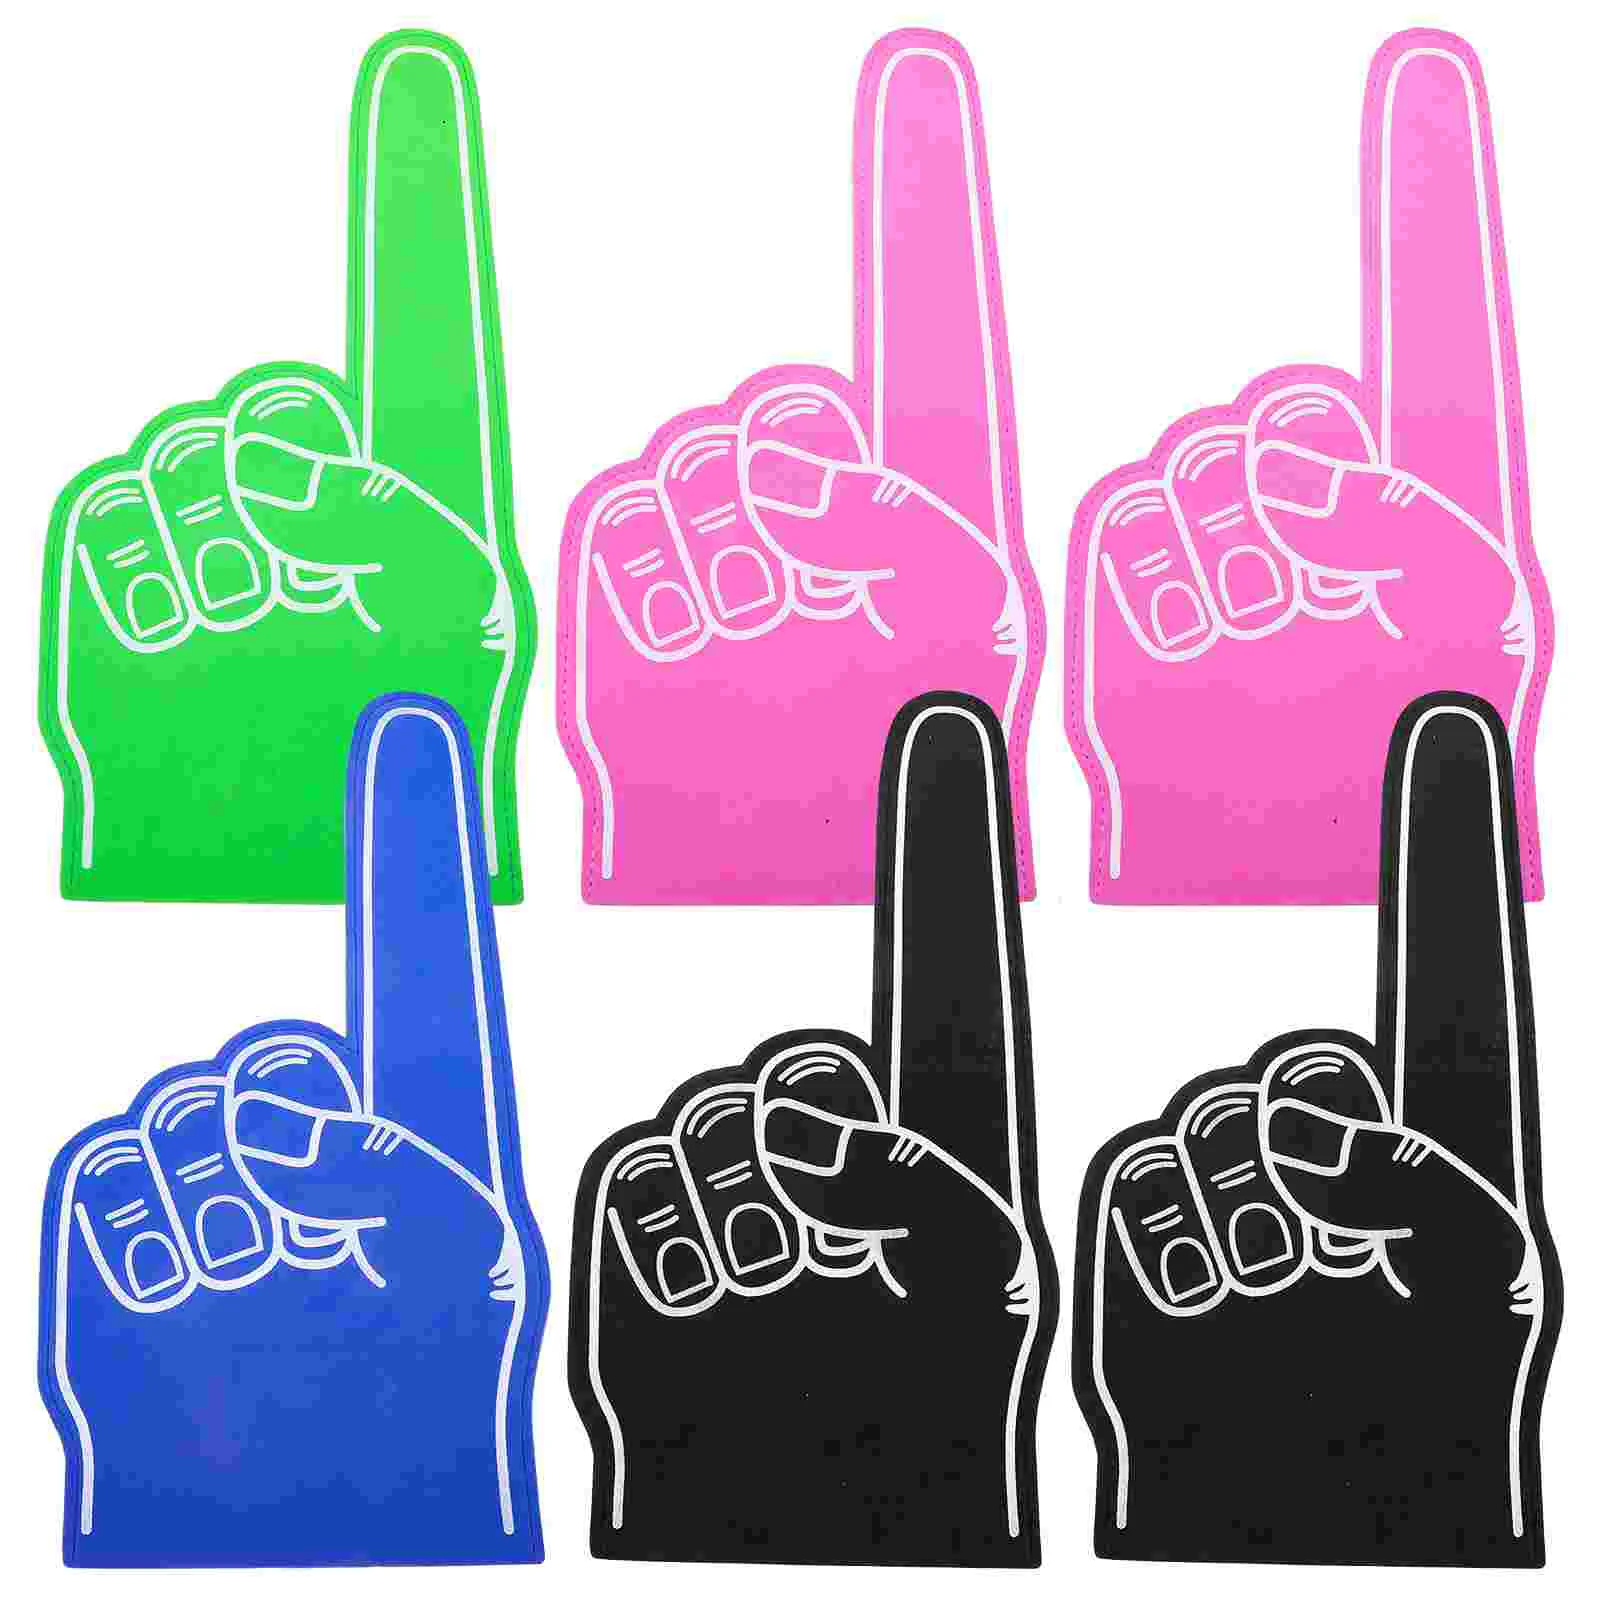 

Hand Support Props Cheerleading Foosball for Sporting Events Cheering Fingers Palm Gloves Mini